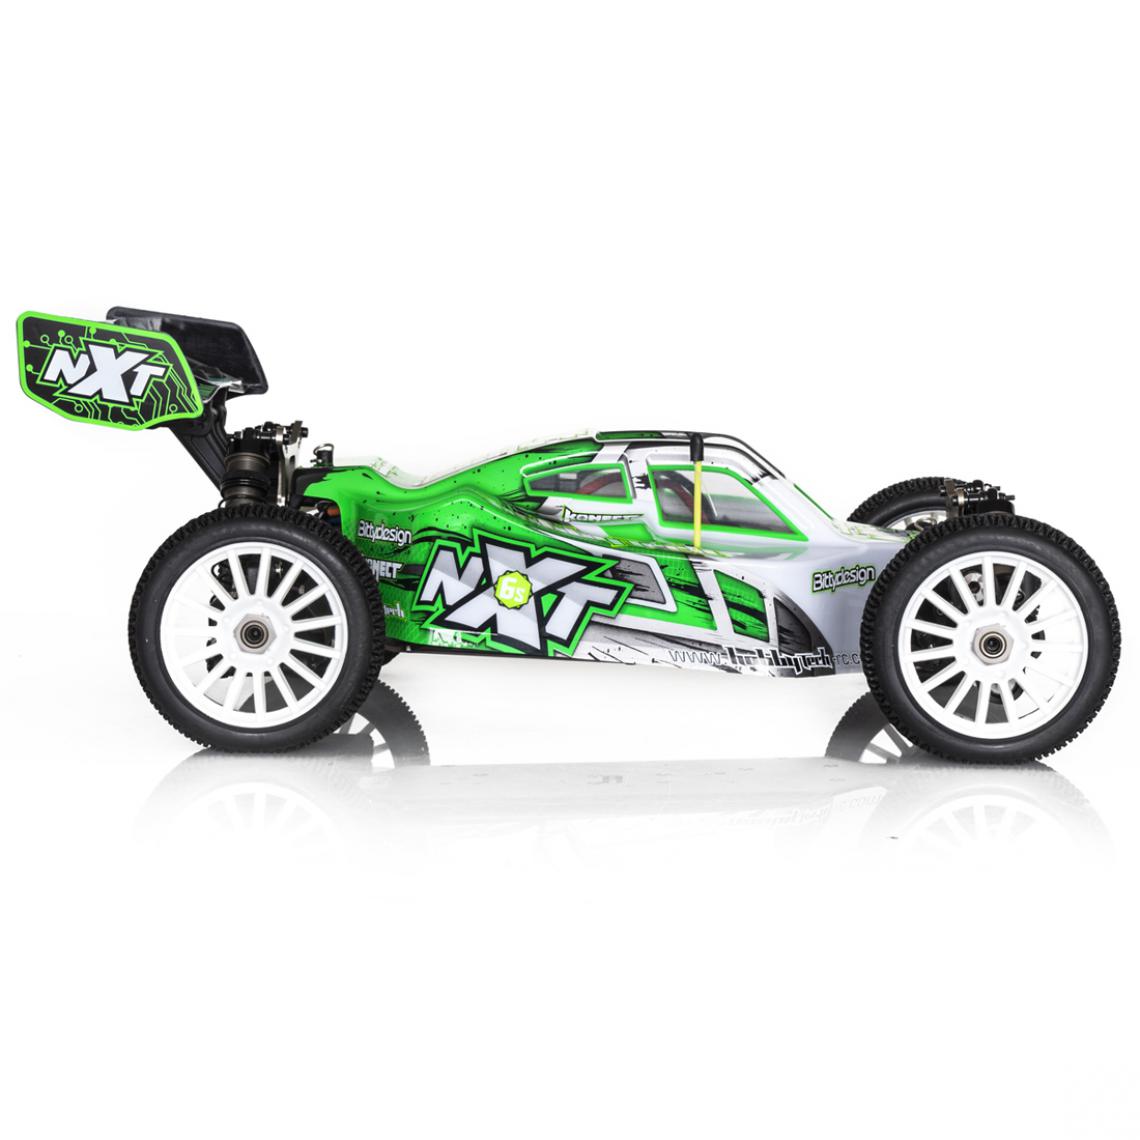 Hobbytech - Voiture RC SPIRIT NXT EP 6S BRUSHLESS 2.0 XTREM EDITION 1/8 ème RTR - Voitures RC